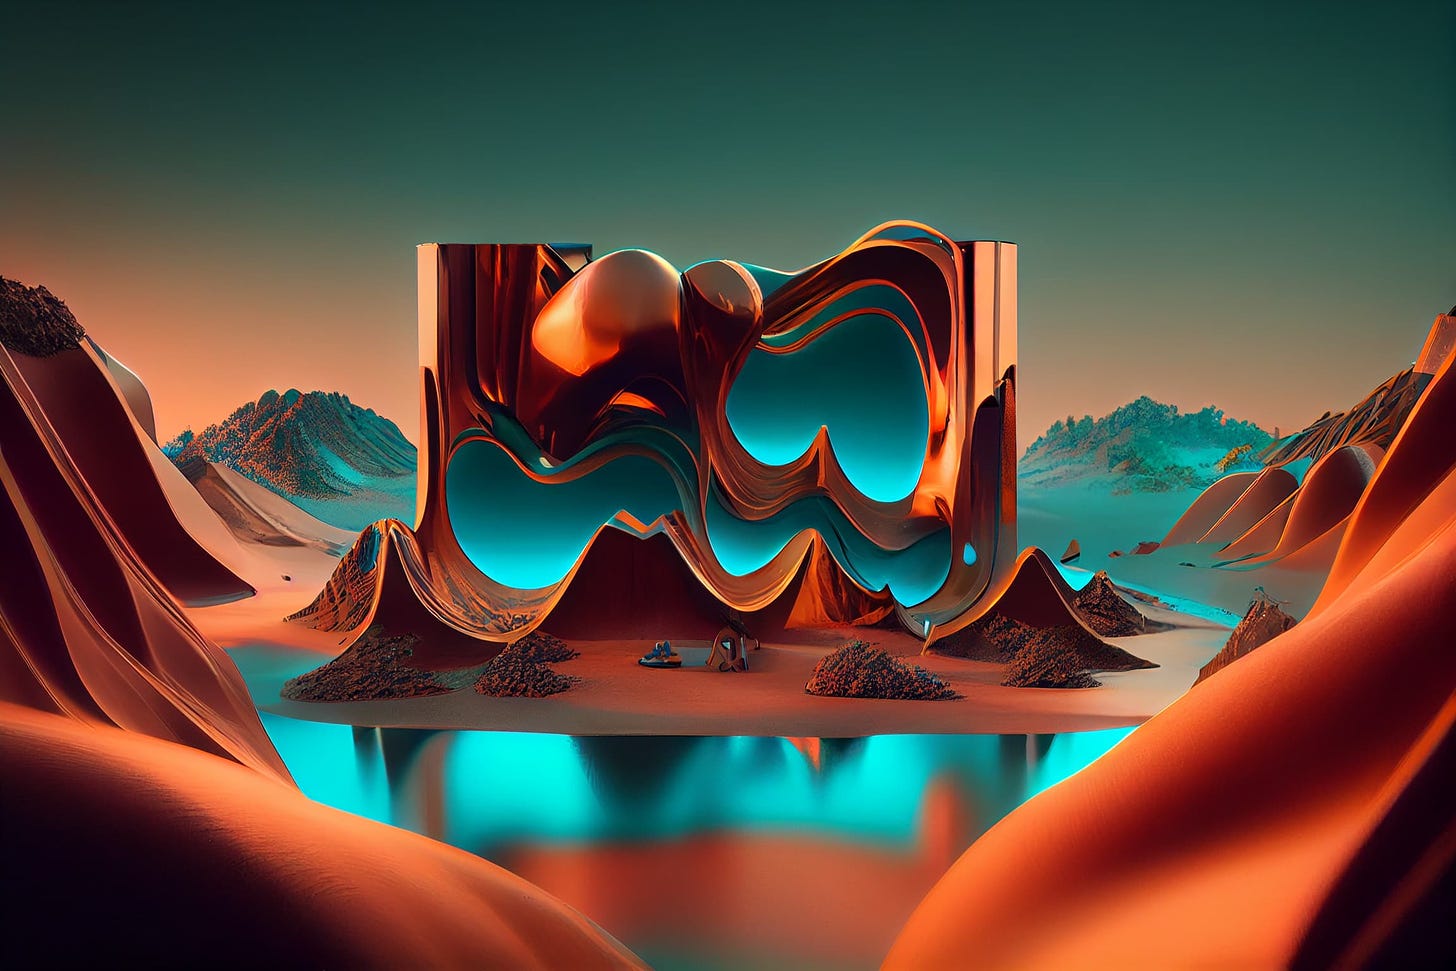 AI-generated image of a copper and turquoise alien landscape, created in Midjourney